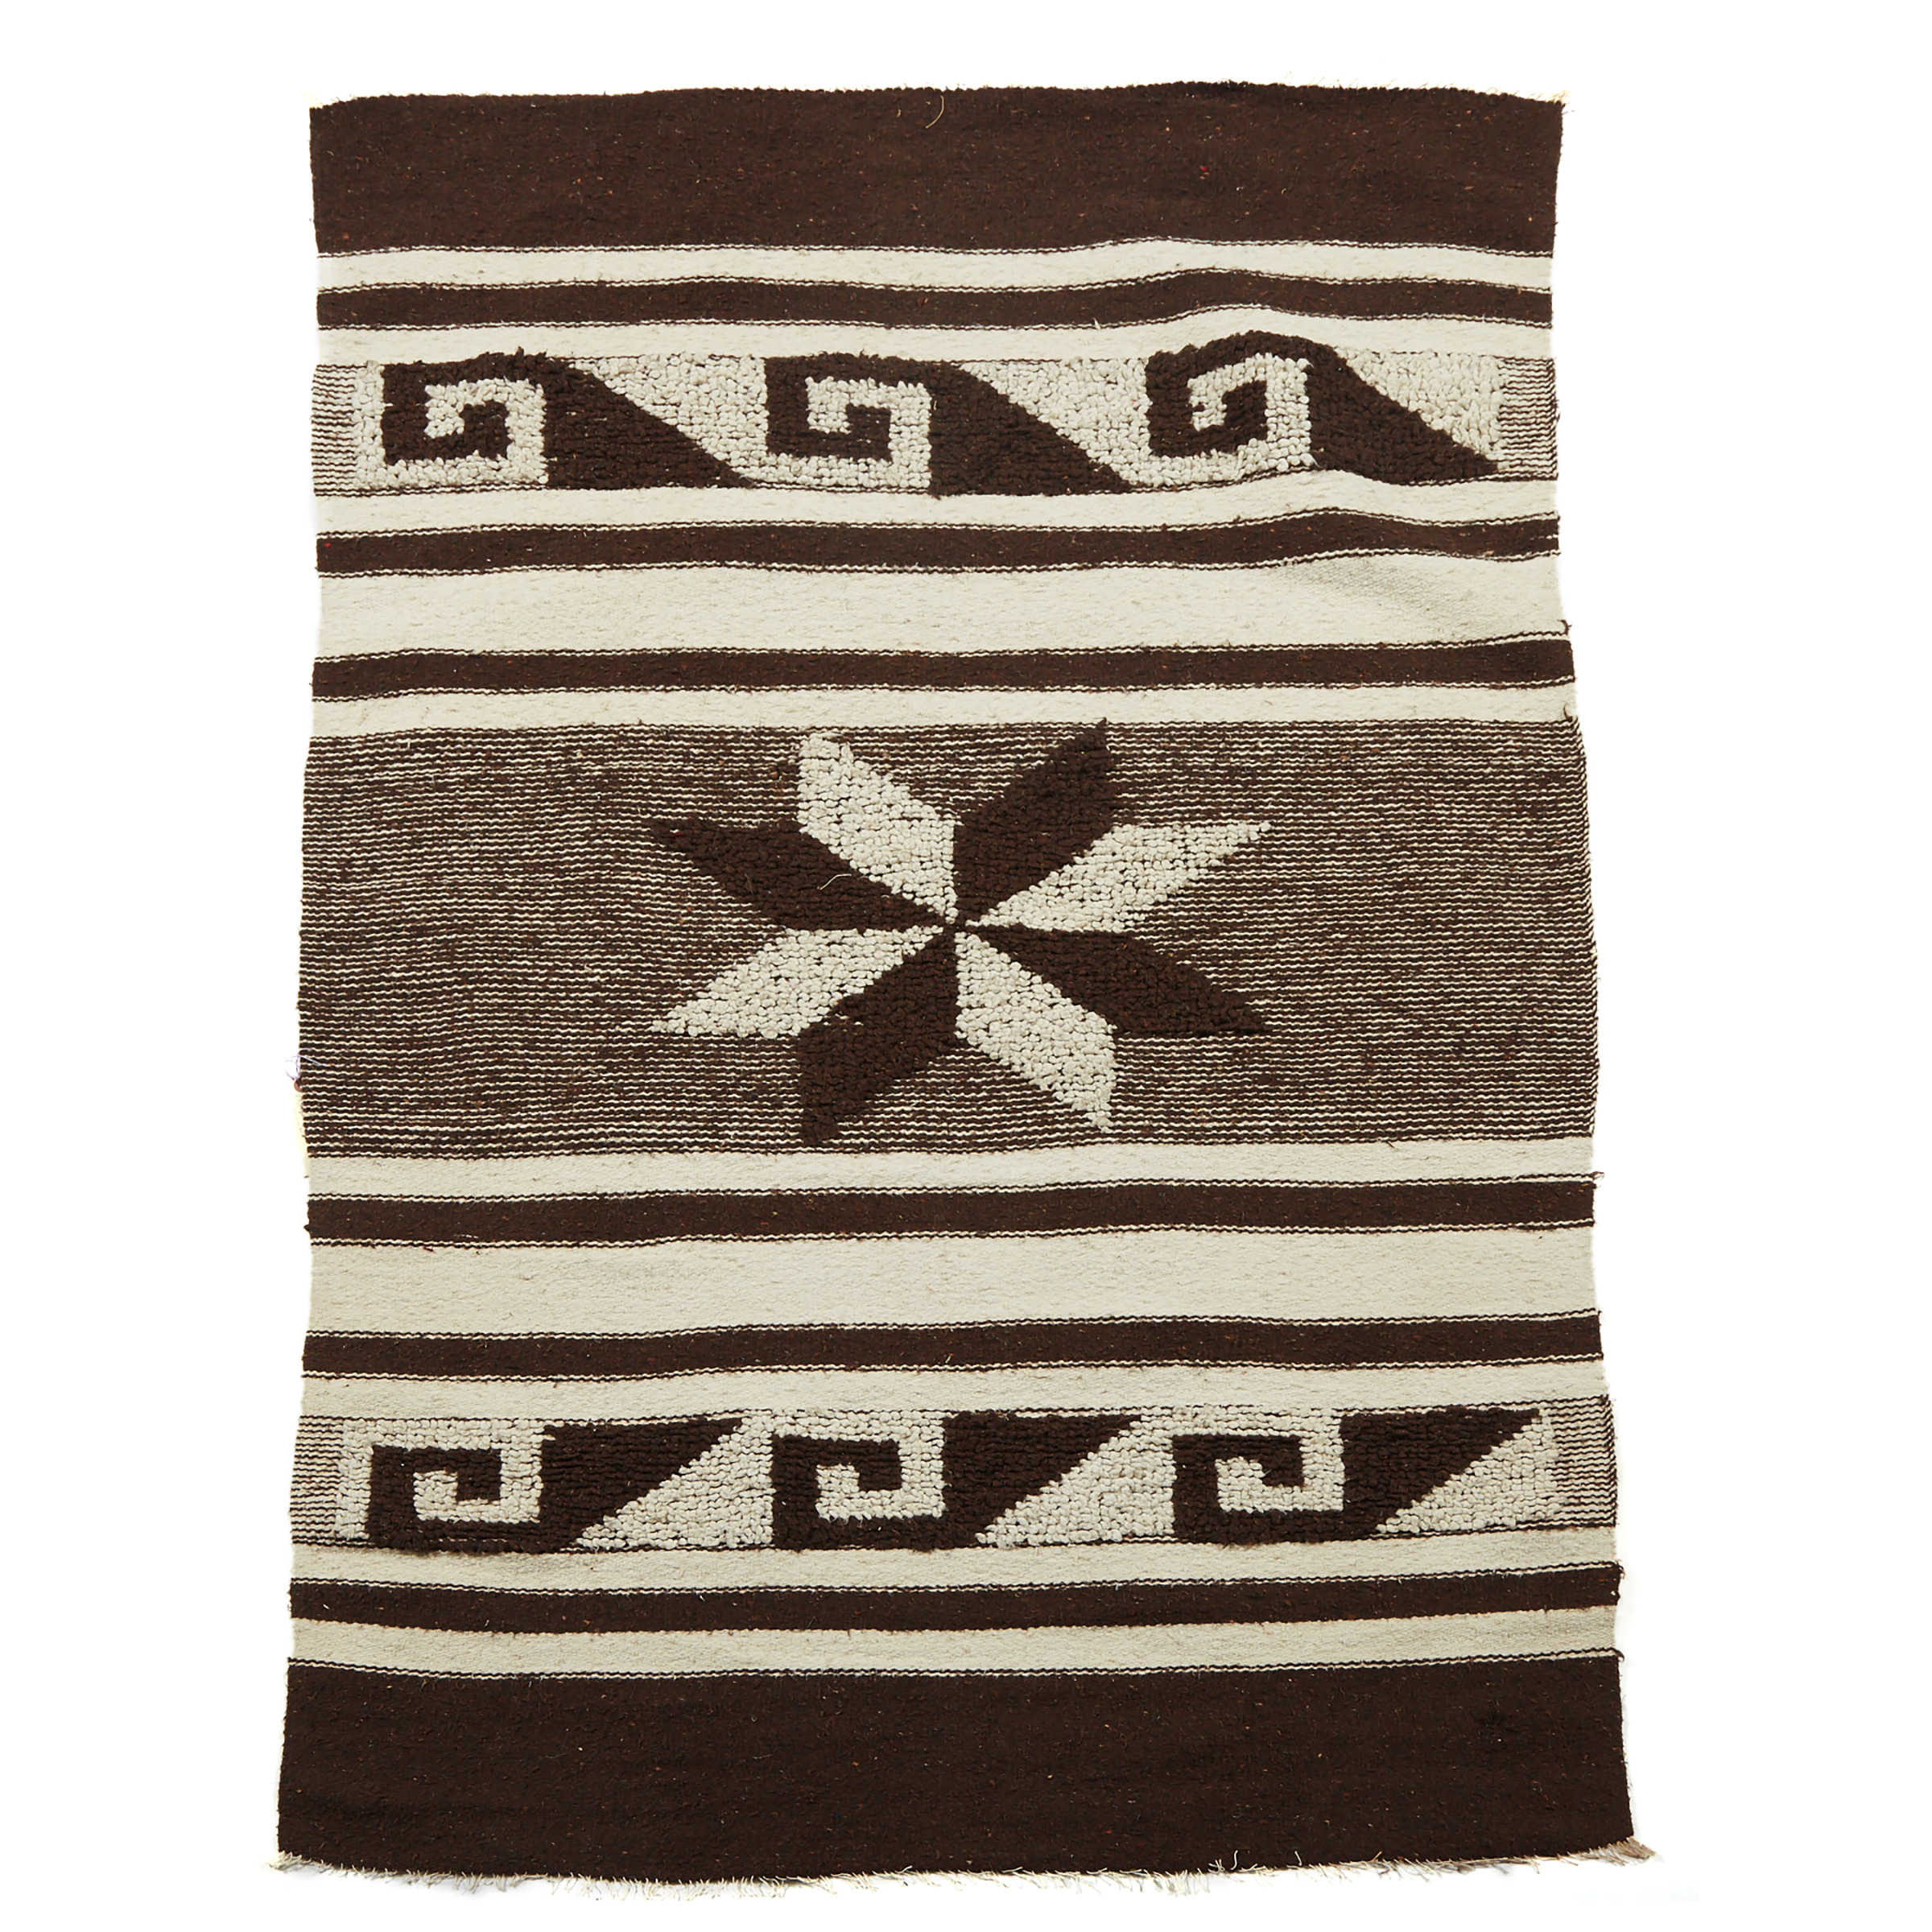 A Peruvian Blanket together with a Mexican Blanket